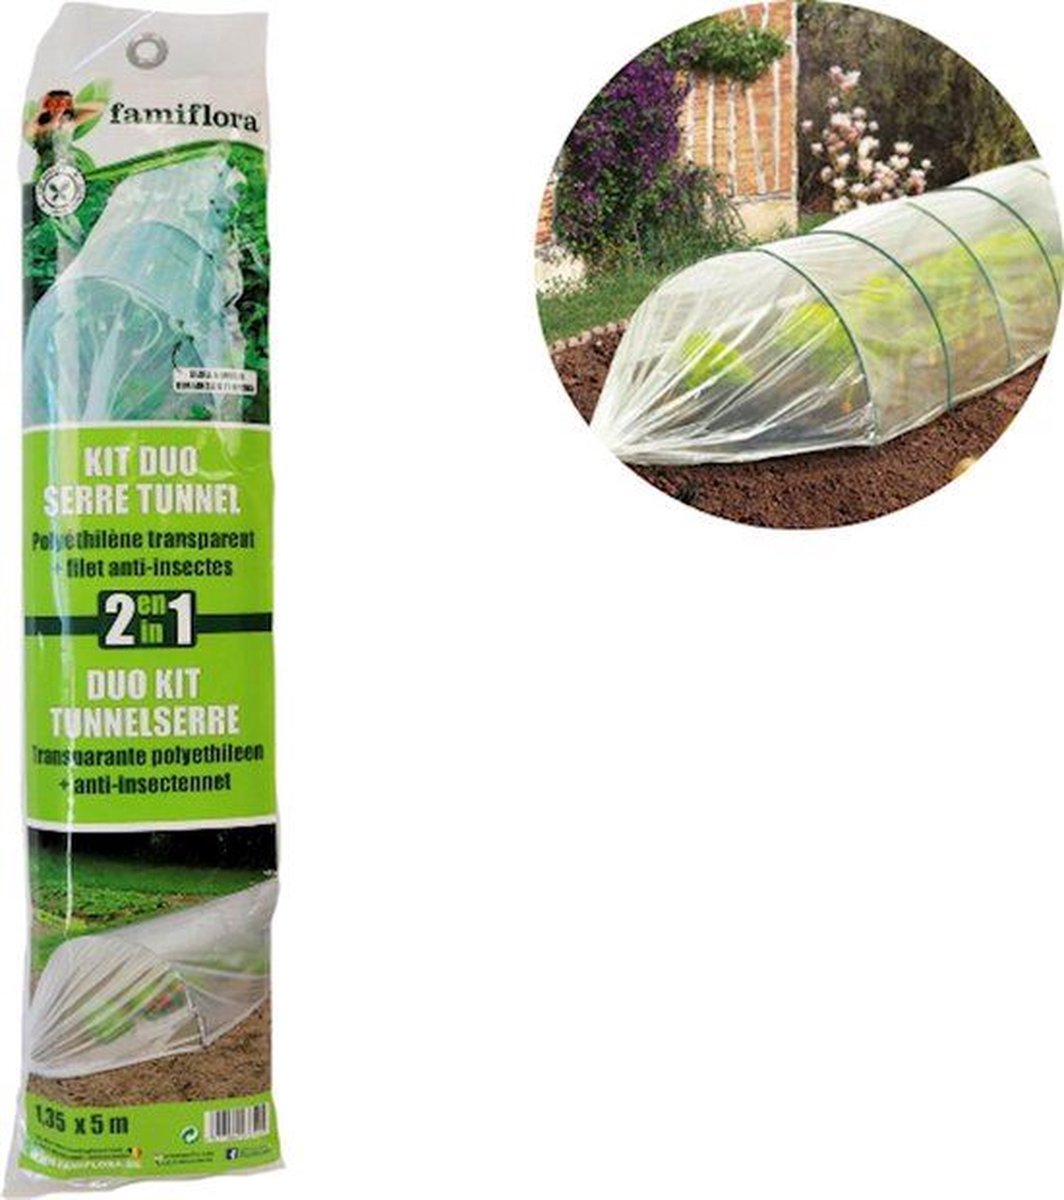 2-in-1 duo kit tunnelserre + anti-insectennet 1.35x5m - Famiflora